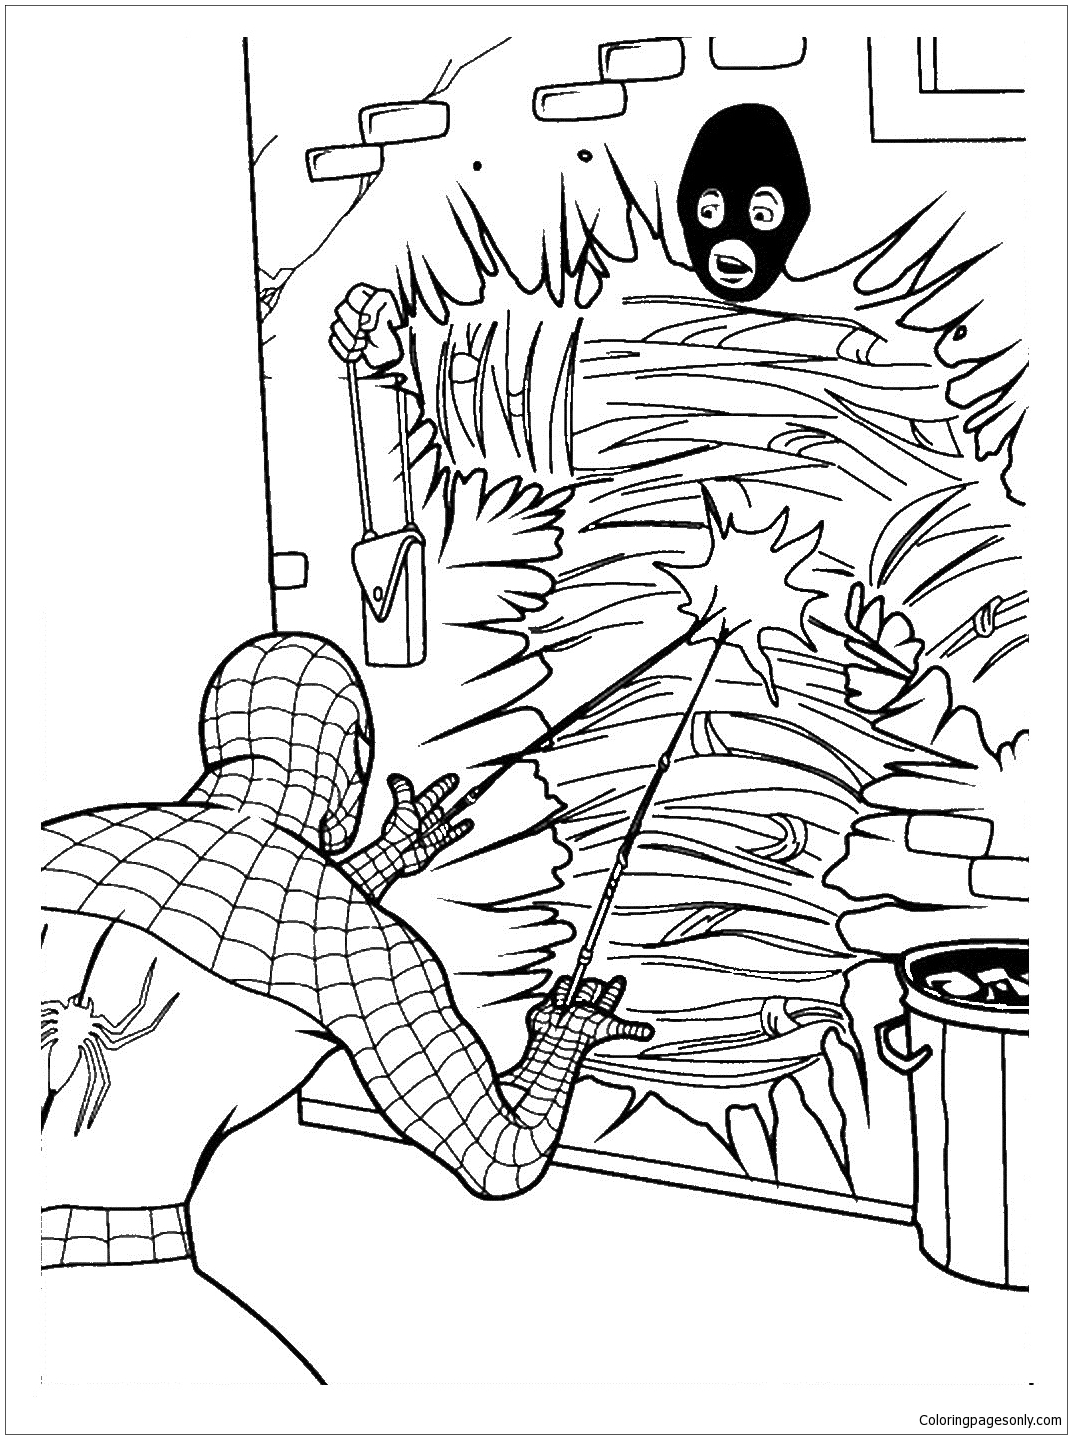 Spiderman 9 Coloring Pages